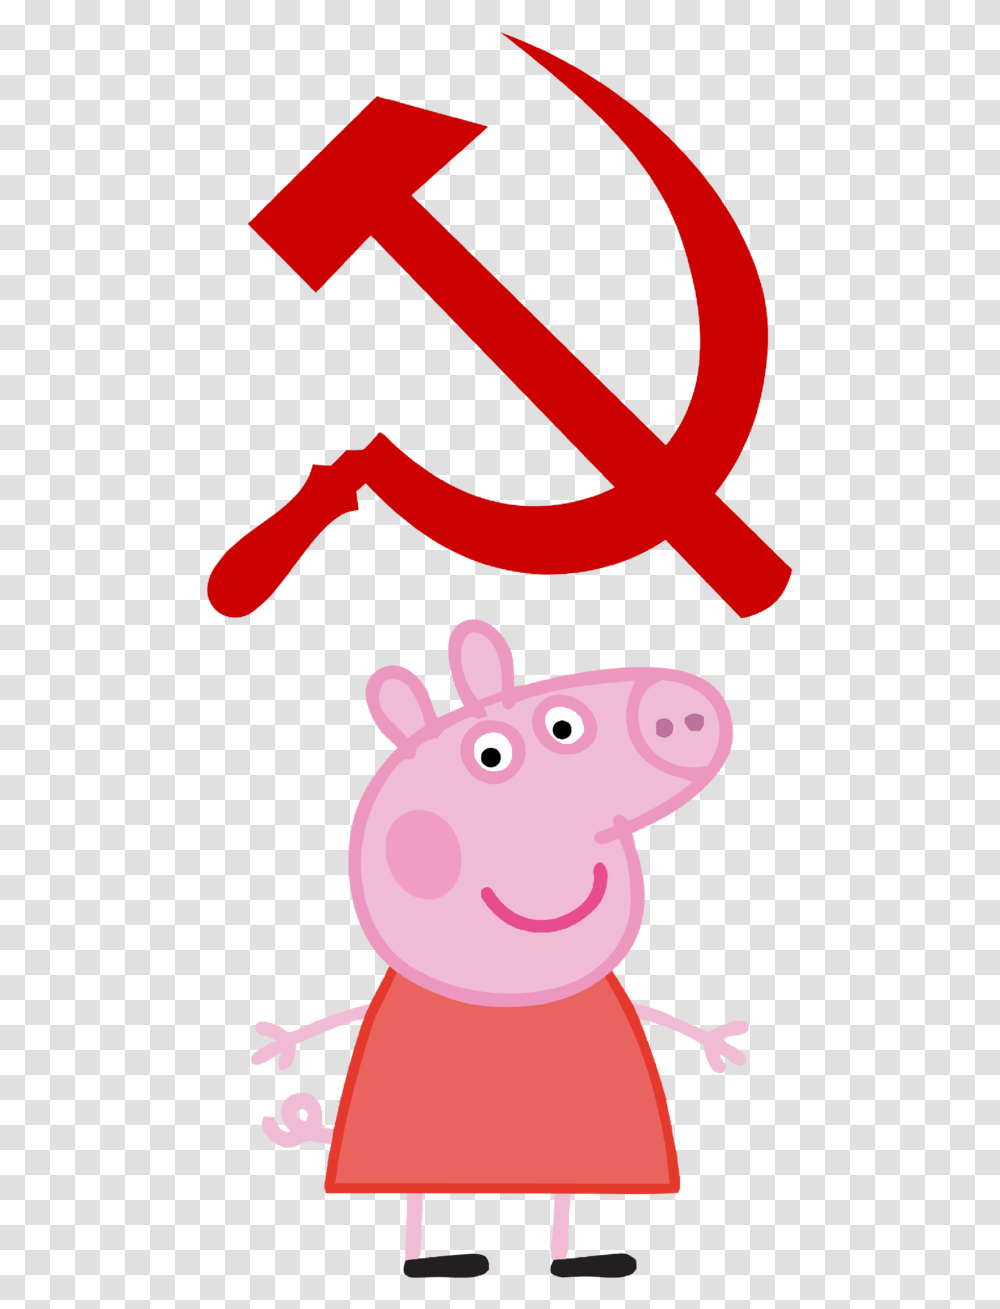 I Have A Lot Of Free Time So I Made A High Quality Cartoon Characters Peppa Pig, Piggy Bank, Mammal, Animal Transparent Png